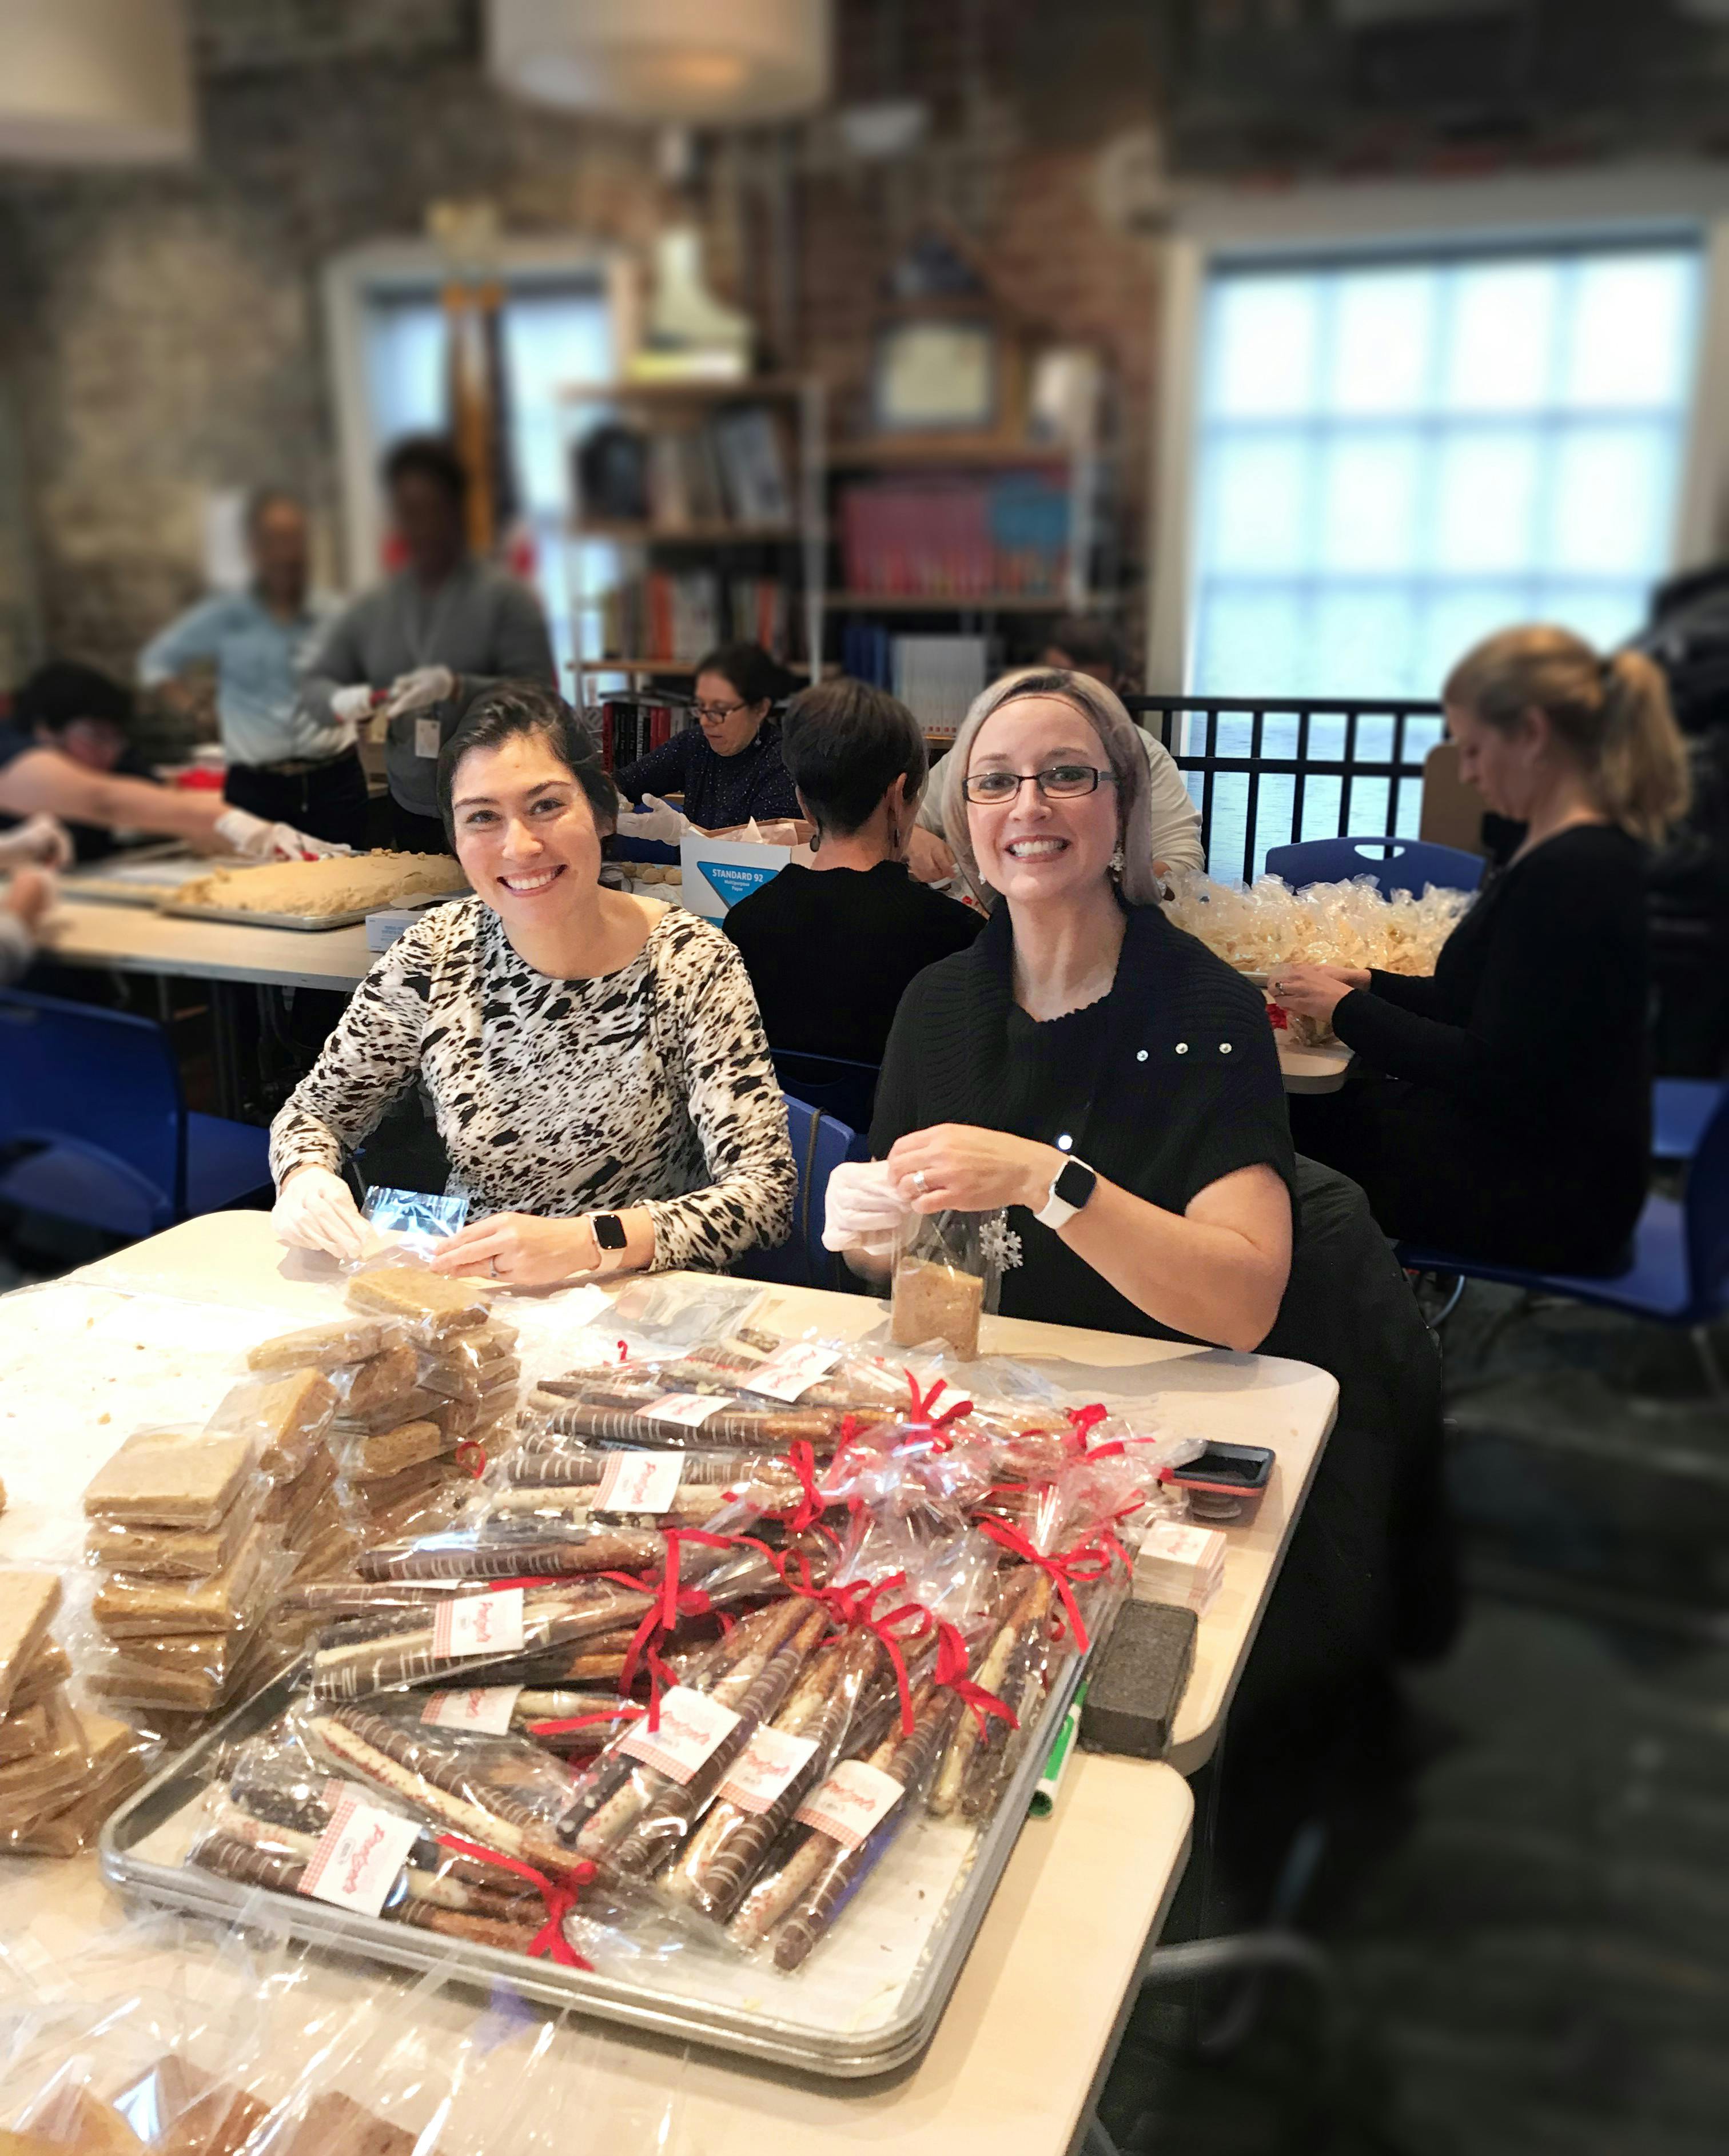 Two people smiling at the camera, seated at a table where they are packing cookies into plastic bags and tying them with a red ribbon. A pile of completed packages is on the table in front of them. In the background are other people engaged in similar activities.